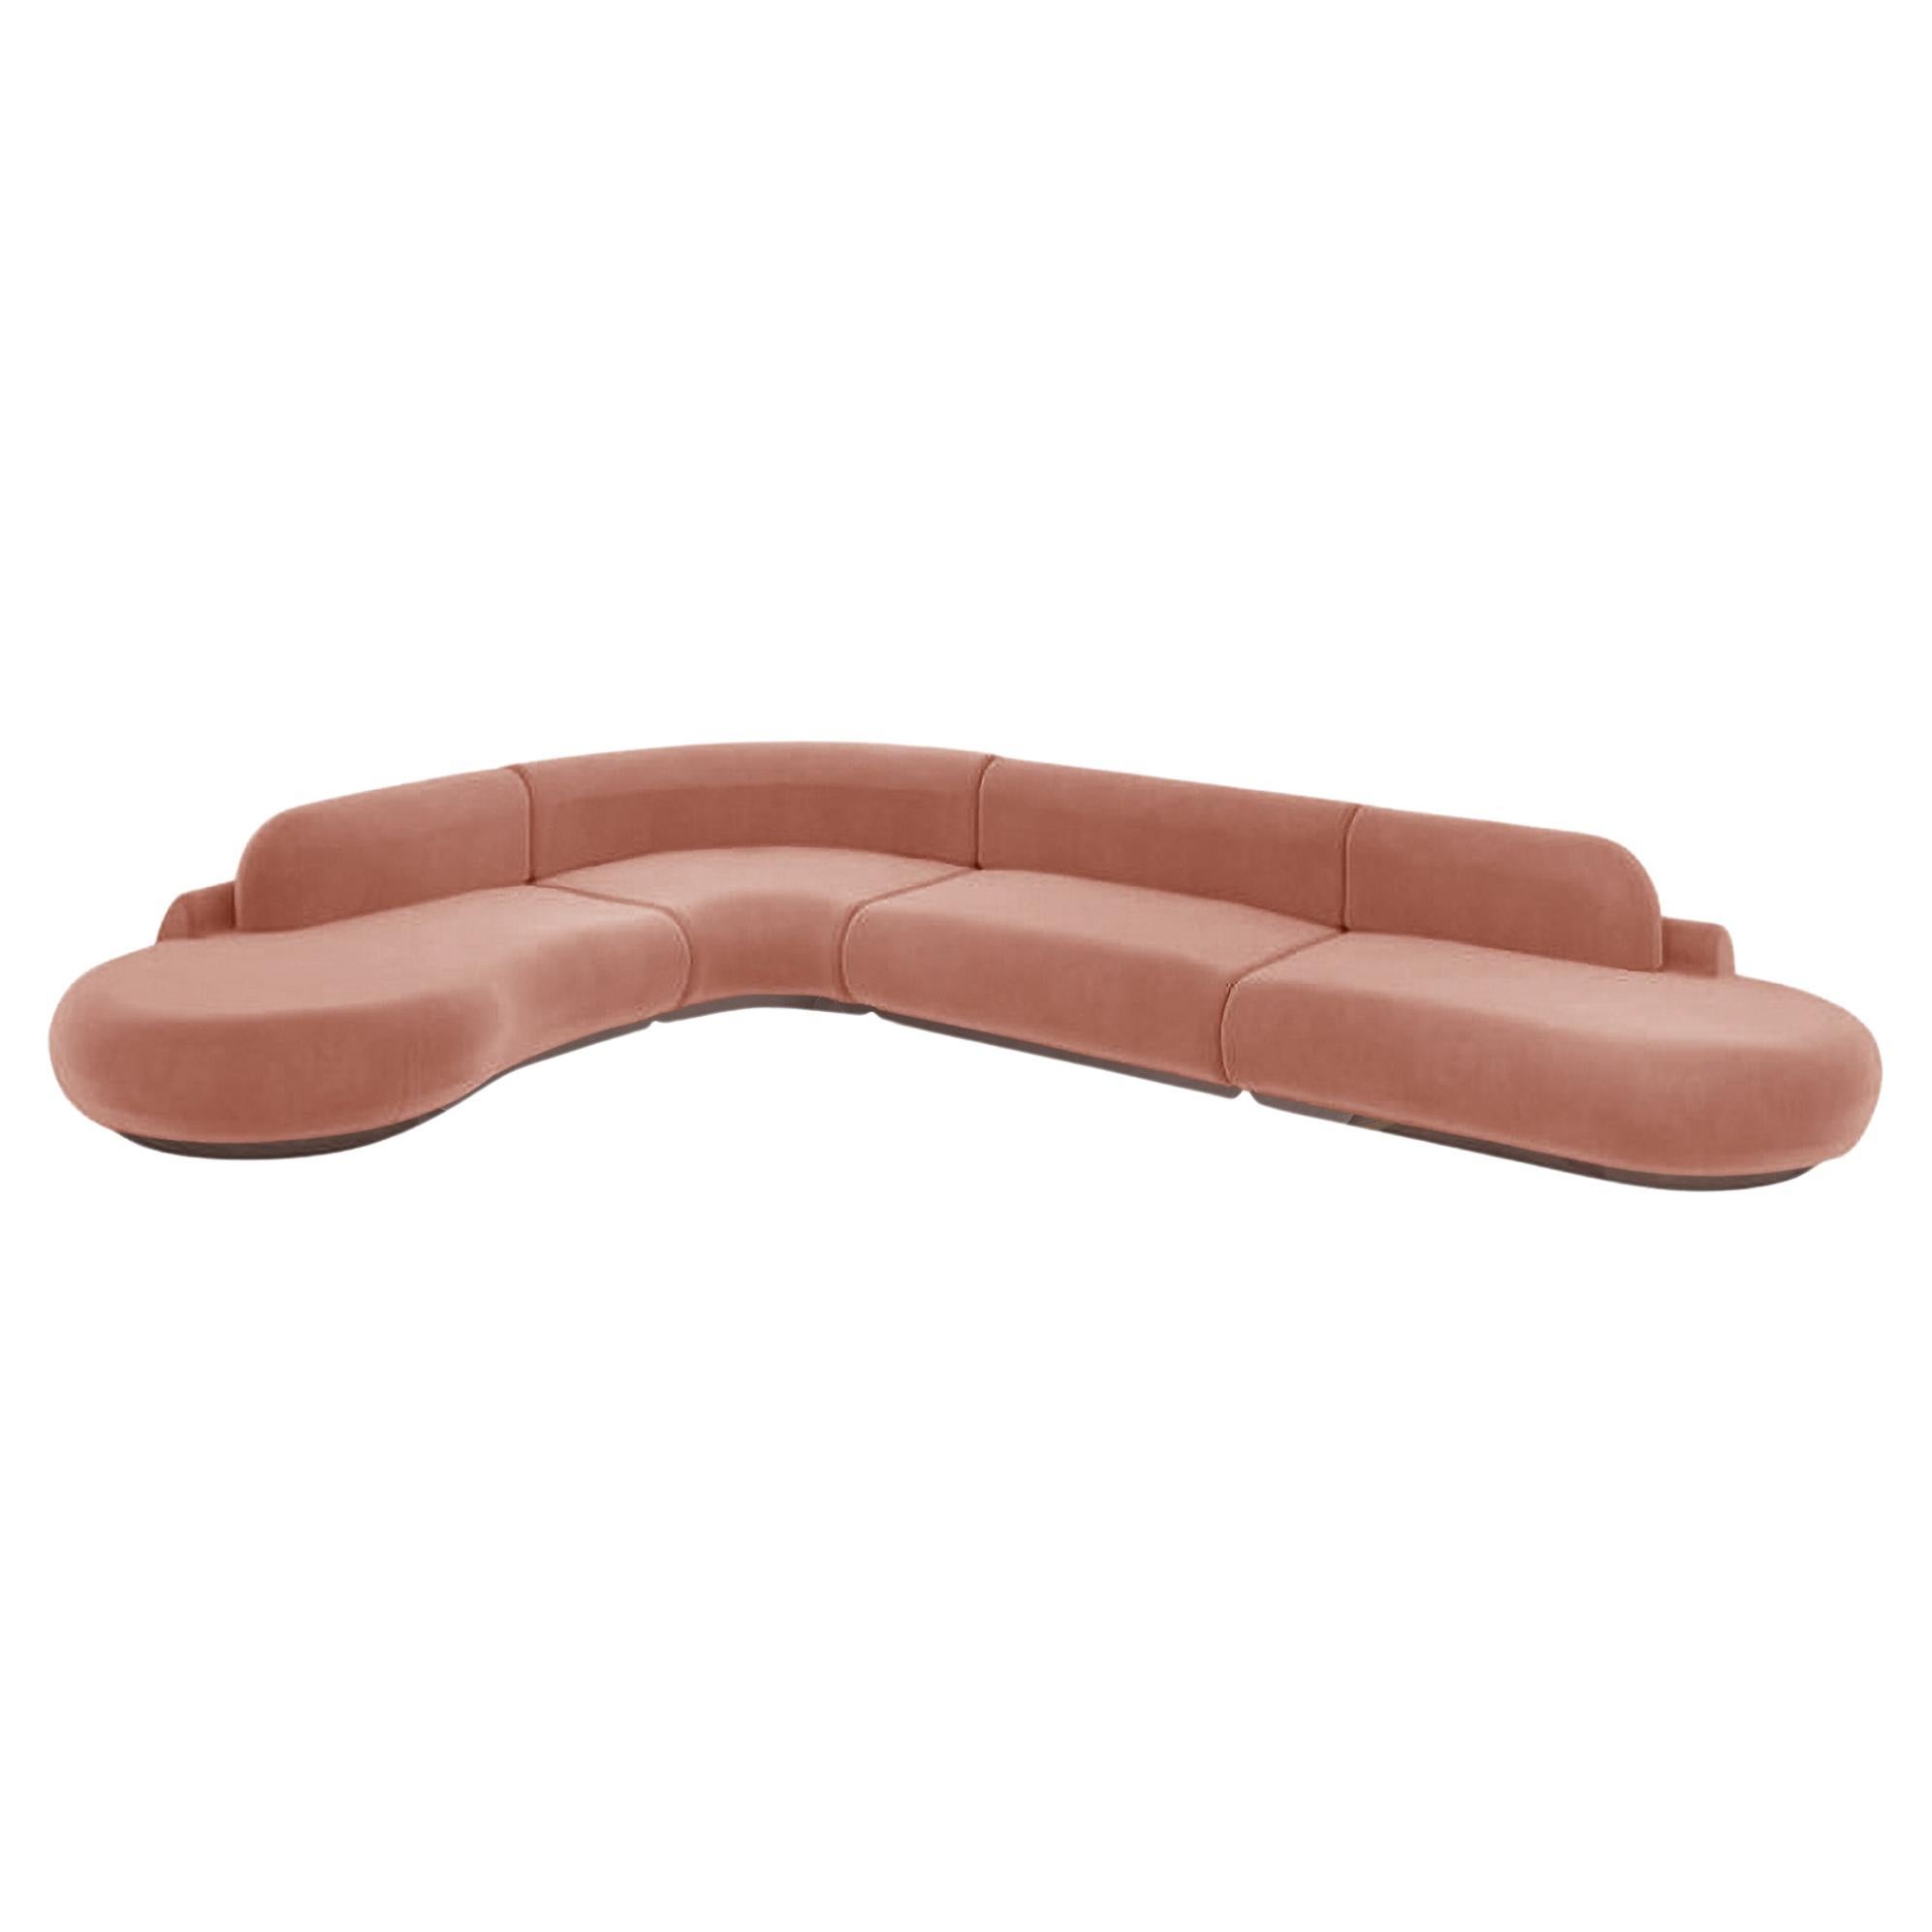 Naked Curved Sectional Sofa, 4 Piece with Beech Ash-056-1 and Paris Brick For Sale